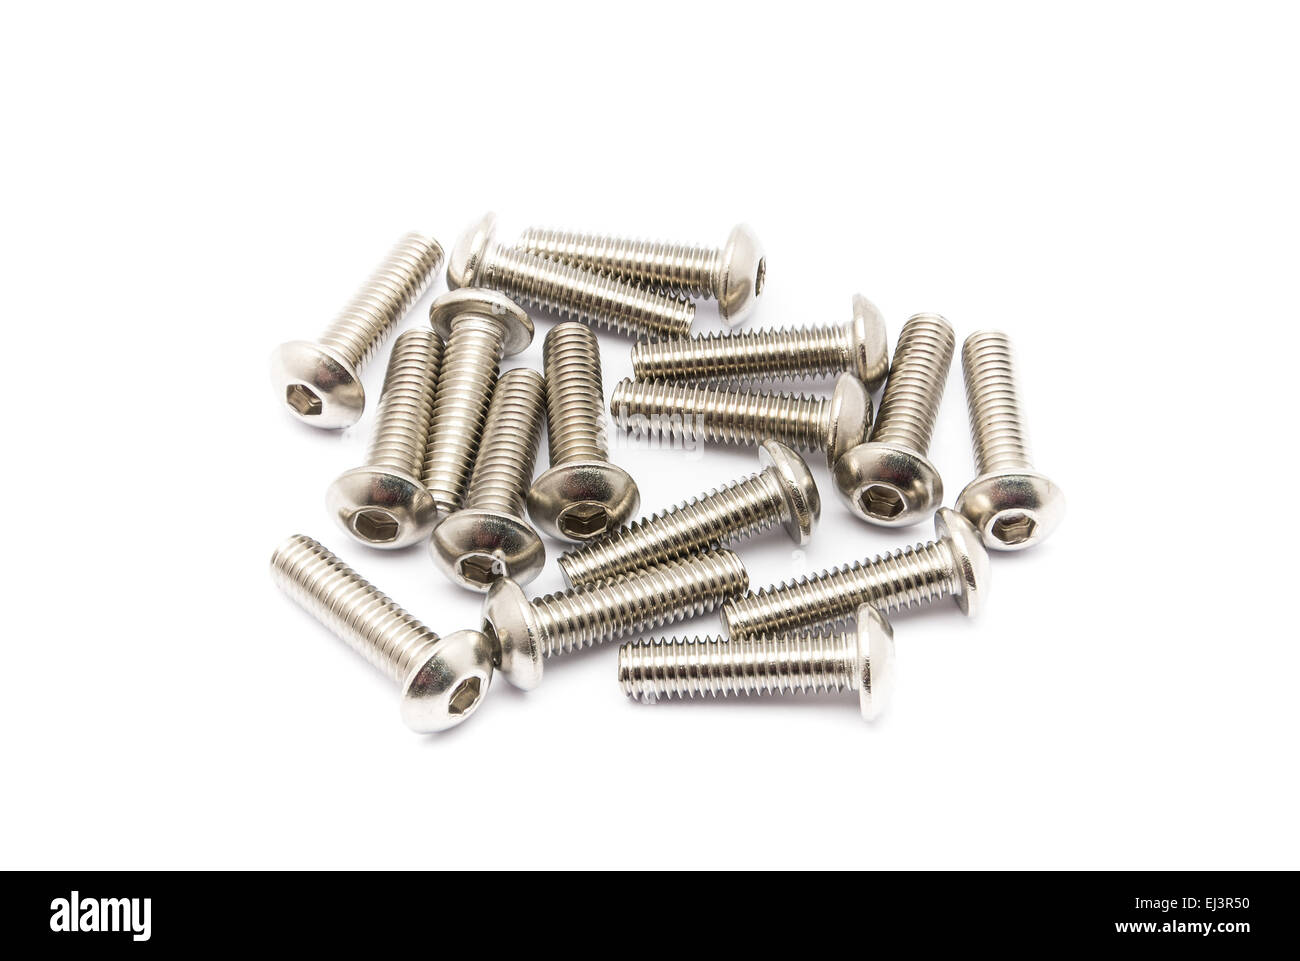 Pile of Ball-Hex -Head Stainless Steel Bolts. Stock Photo